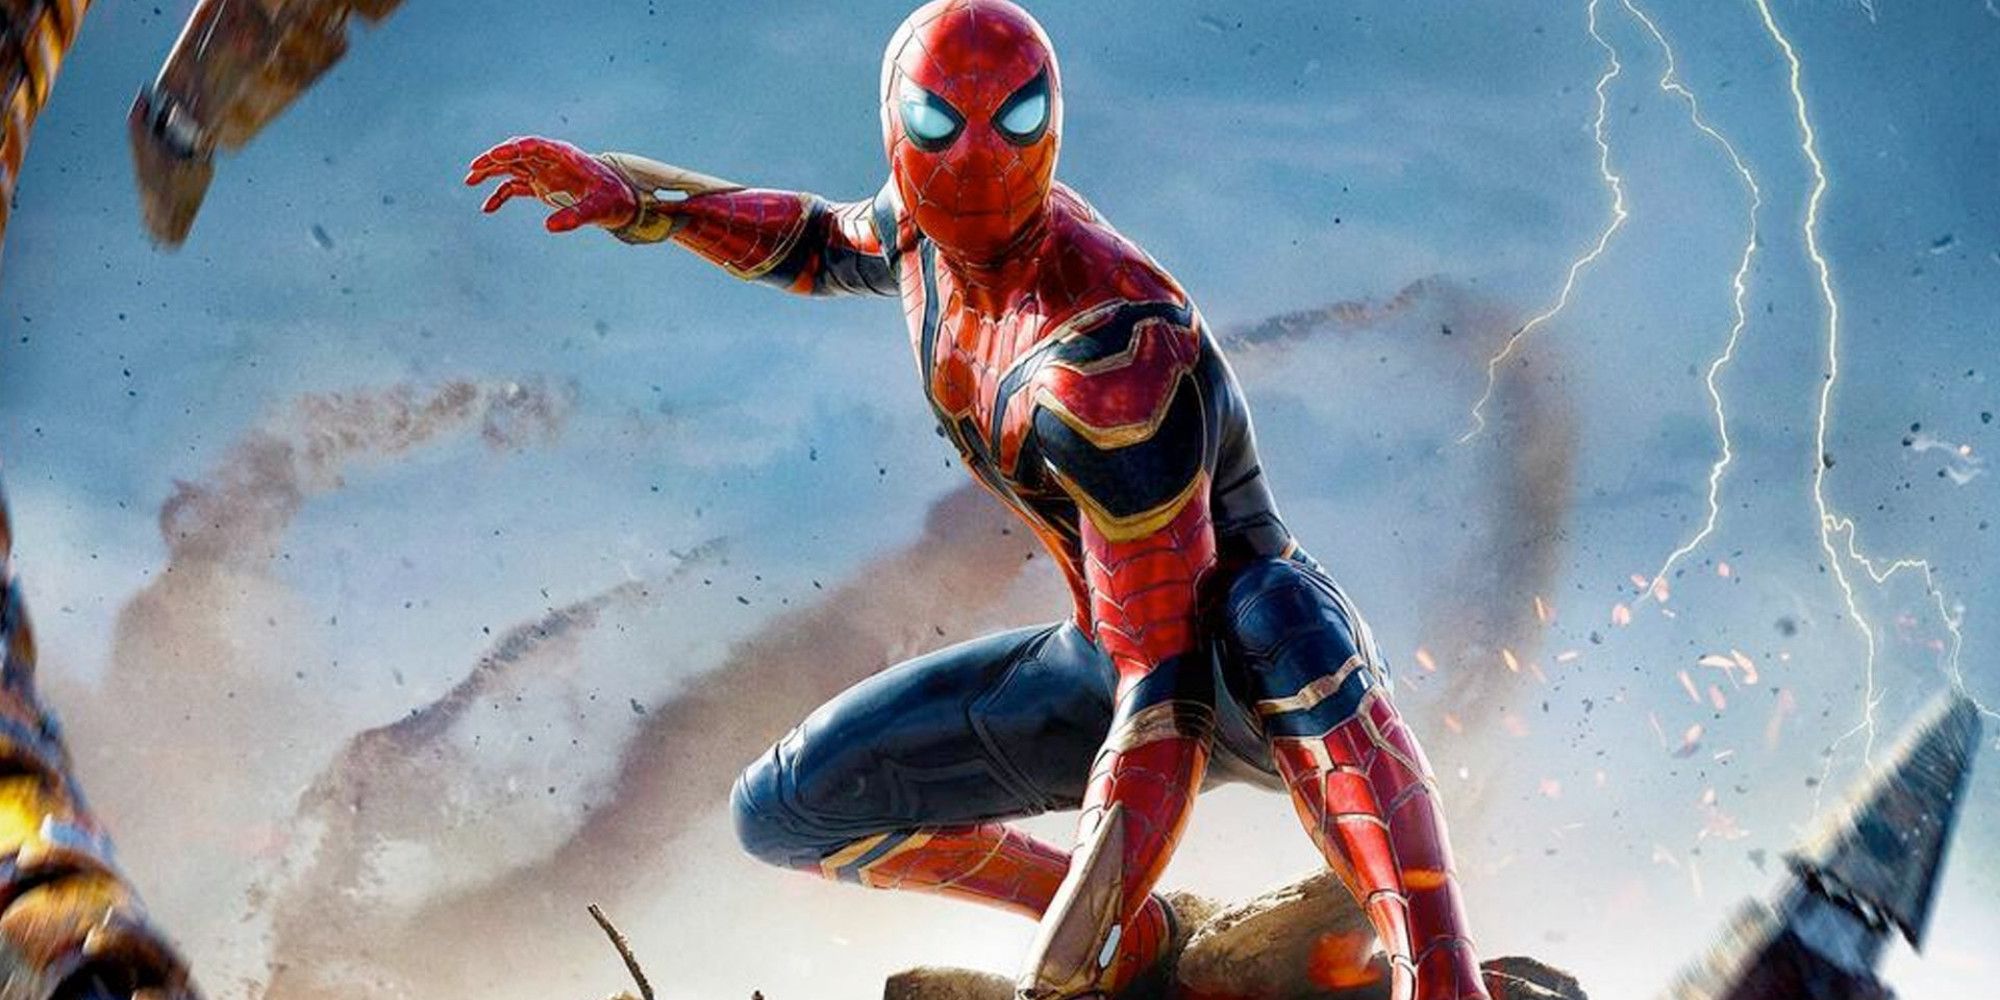 Spider-Man takes signature stance in image from Spider-Man: No Way Home